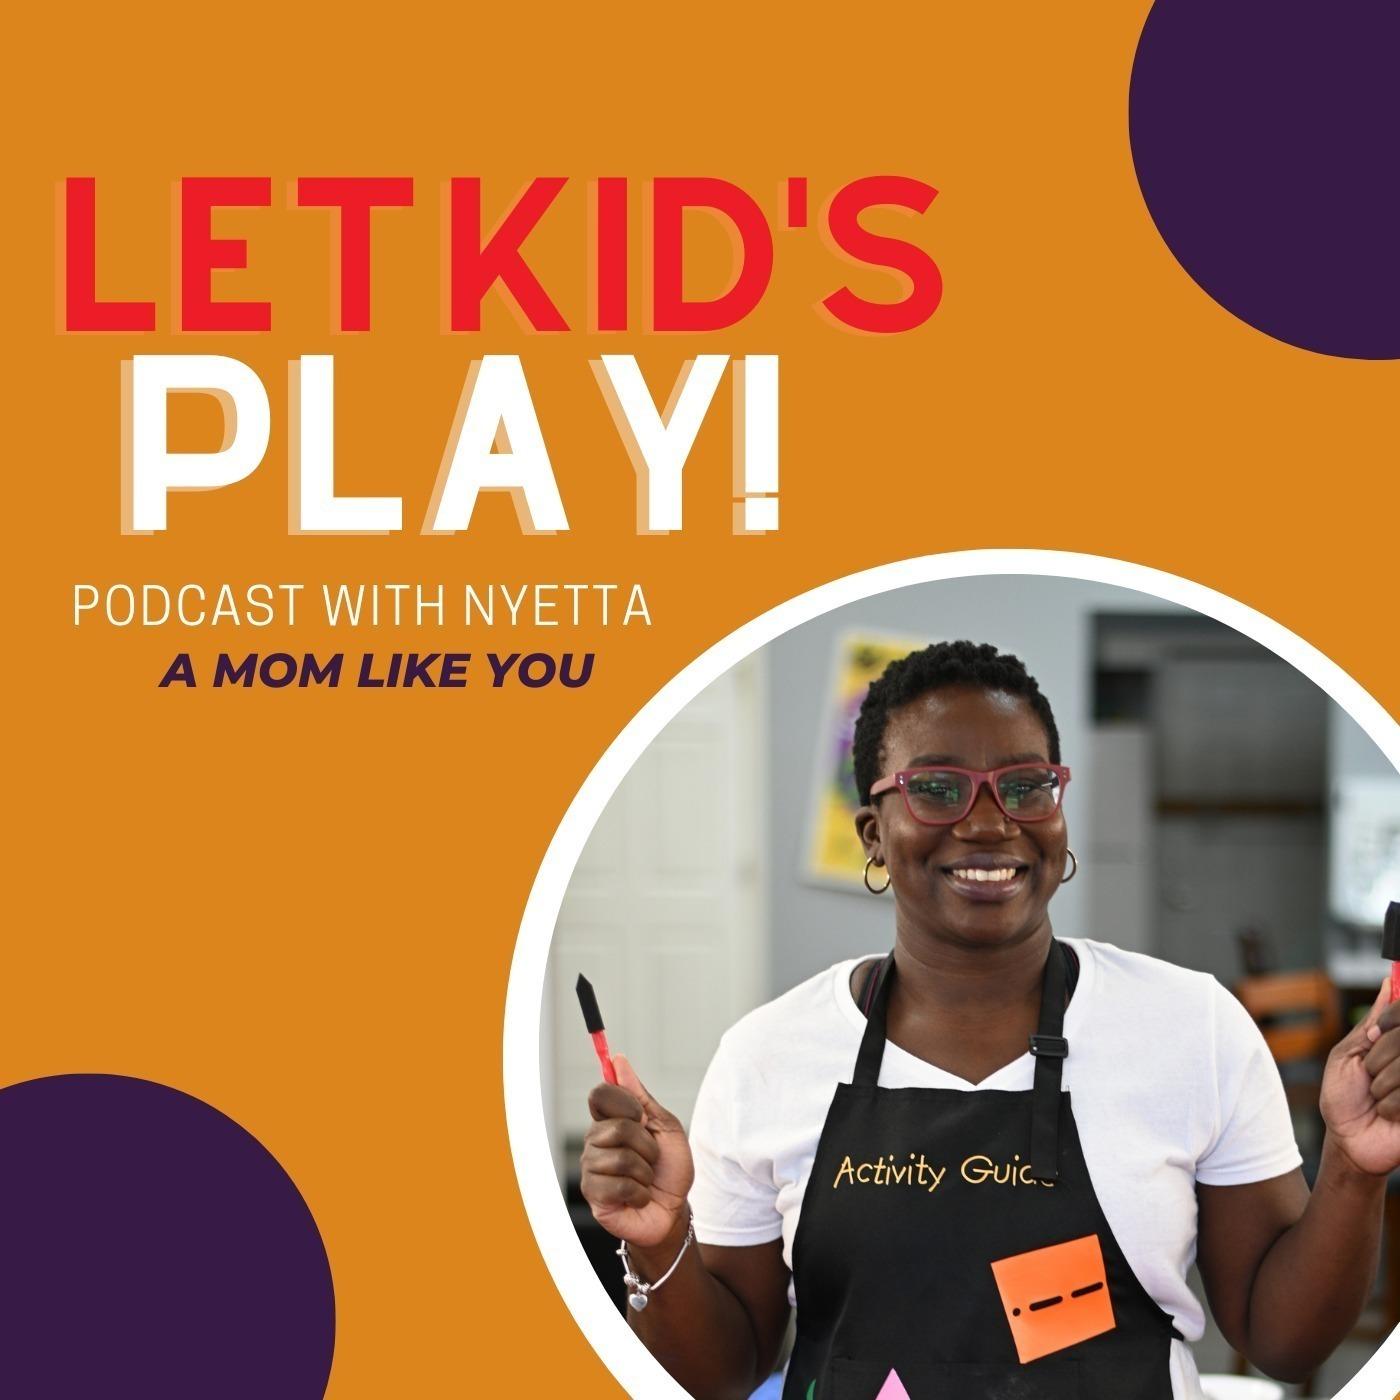 Let Kids Play! Podcast